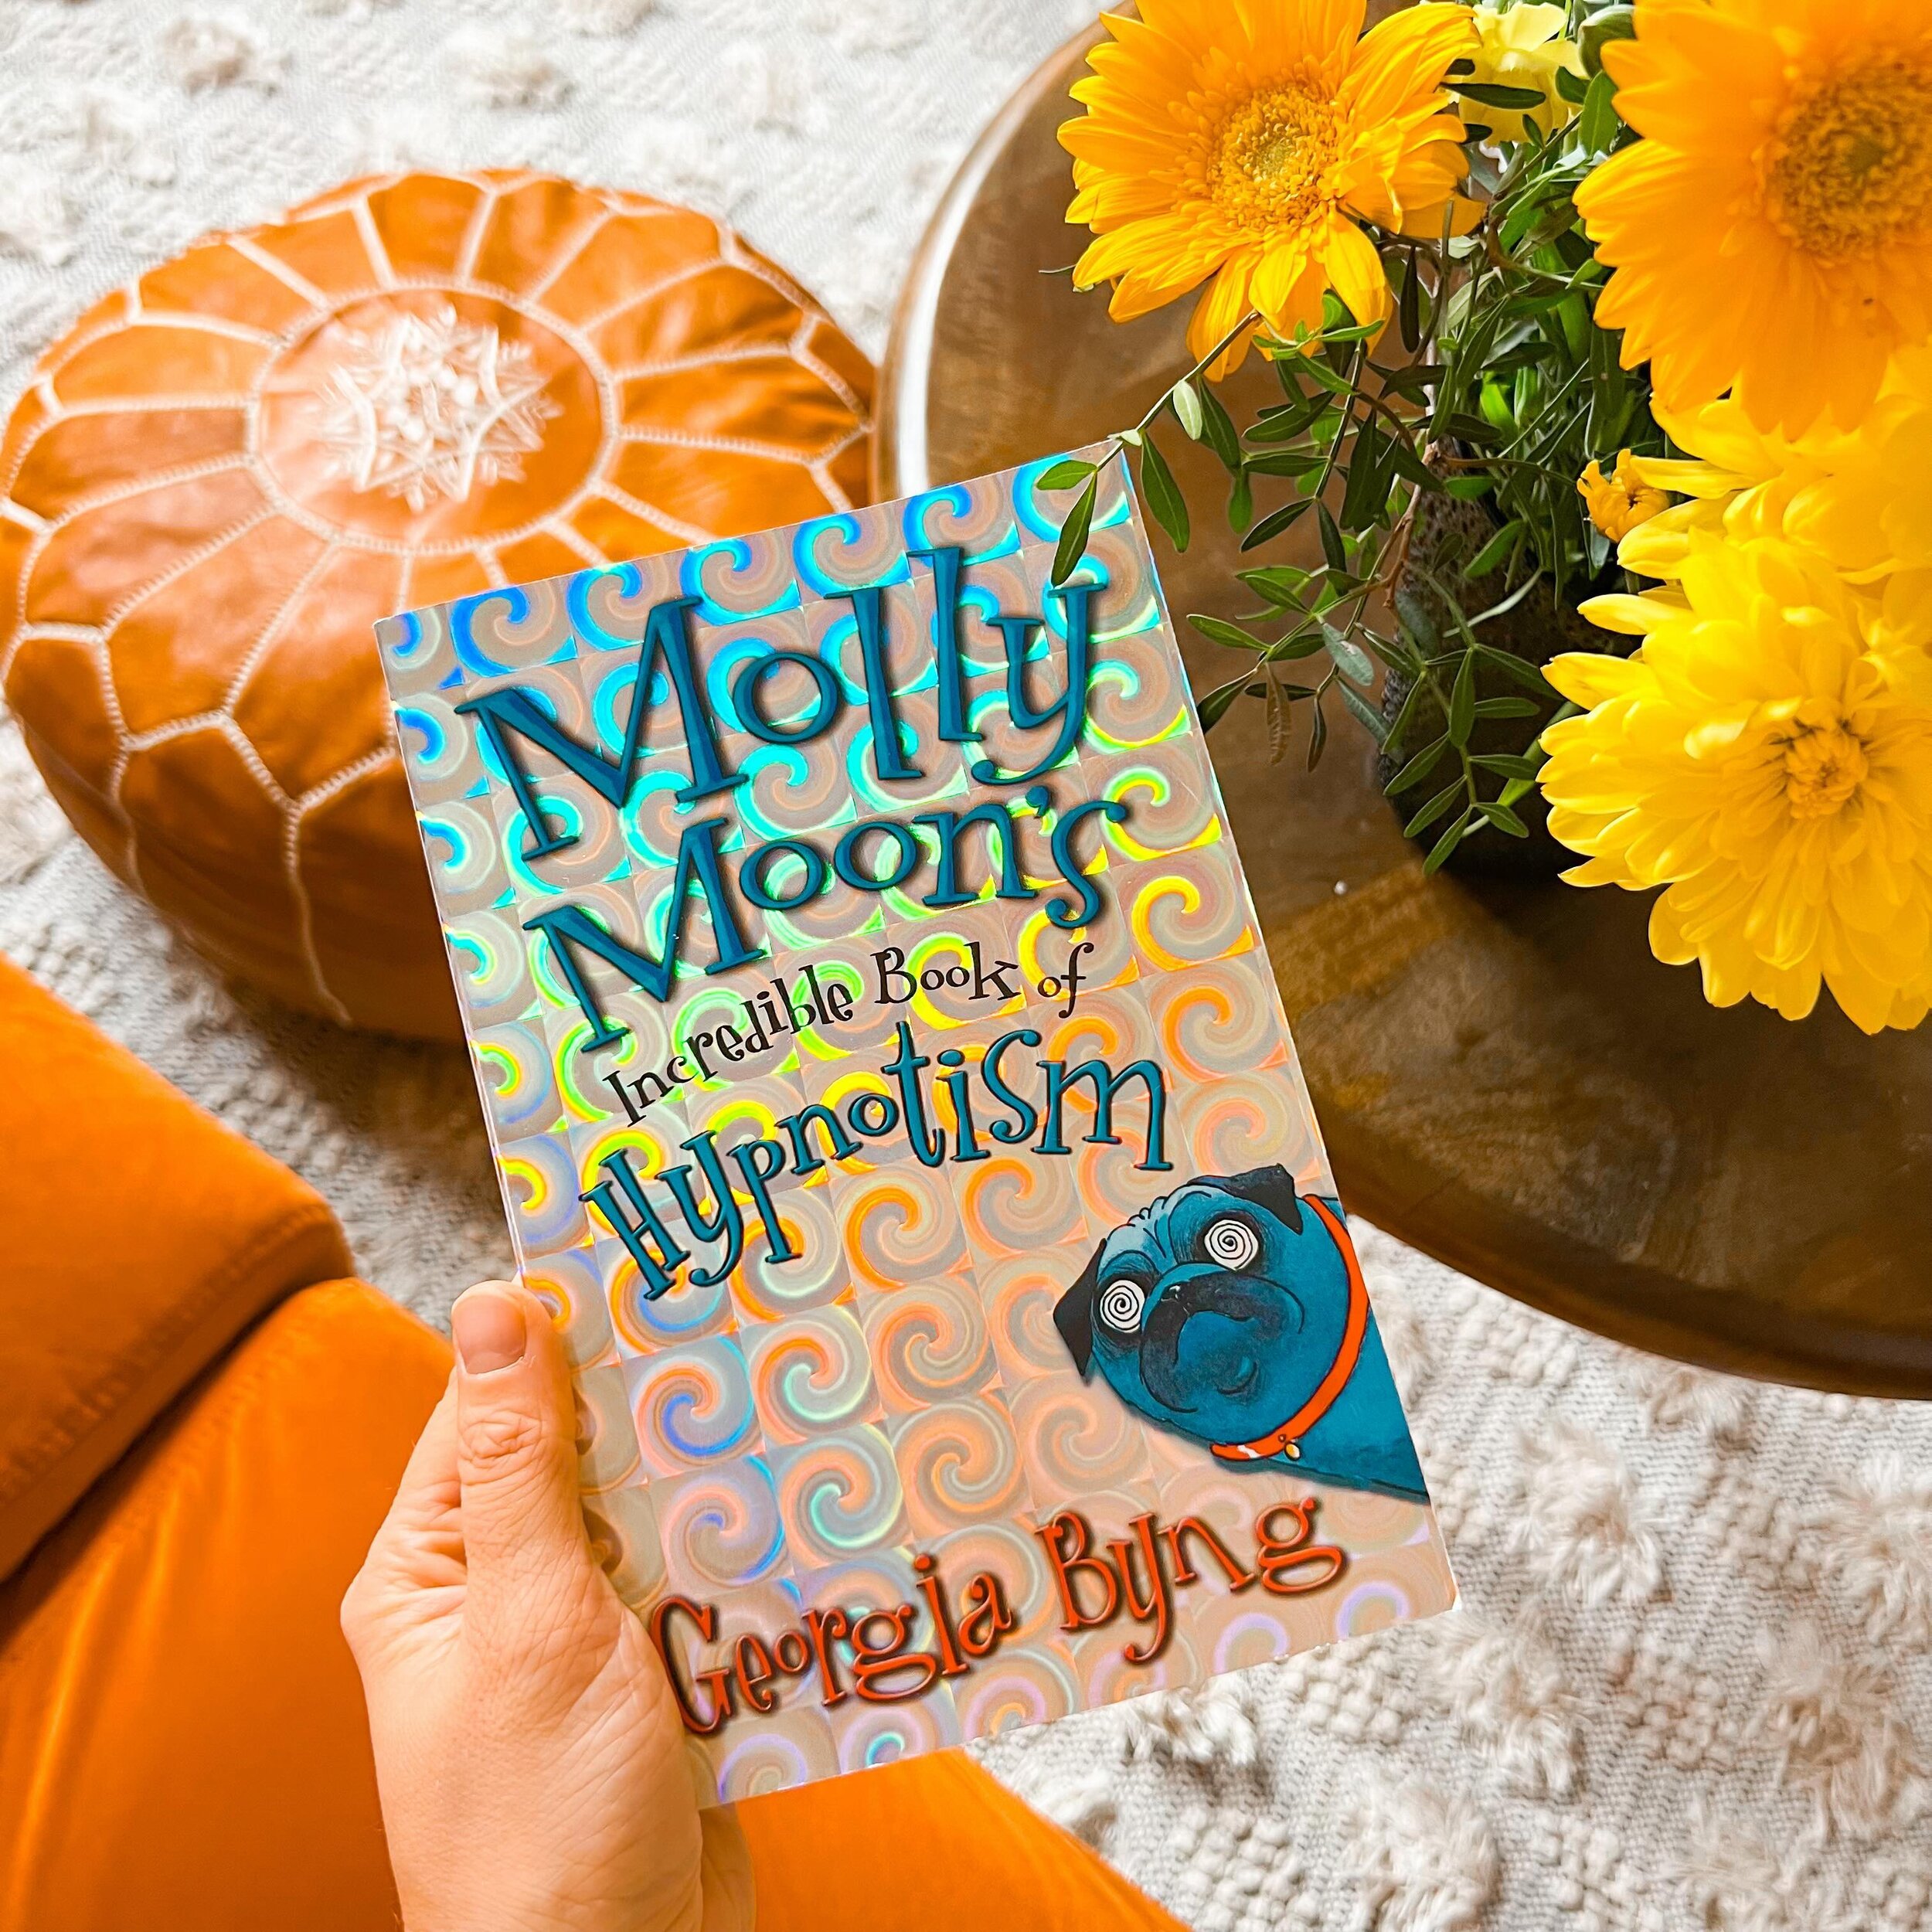 Did anyone else read Molly Moon when growing up? It was one of my very favourite series ever! It tells the story of Molly, an orphan, who finds a book about hypnotism, and then runs away to New York. That&rsquo;s all I remember, but I remember it bei